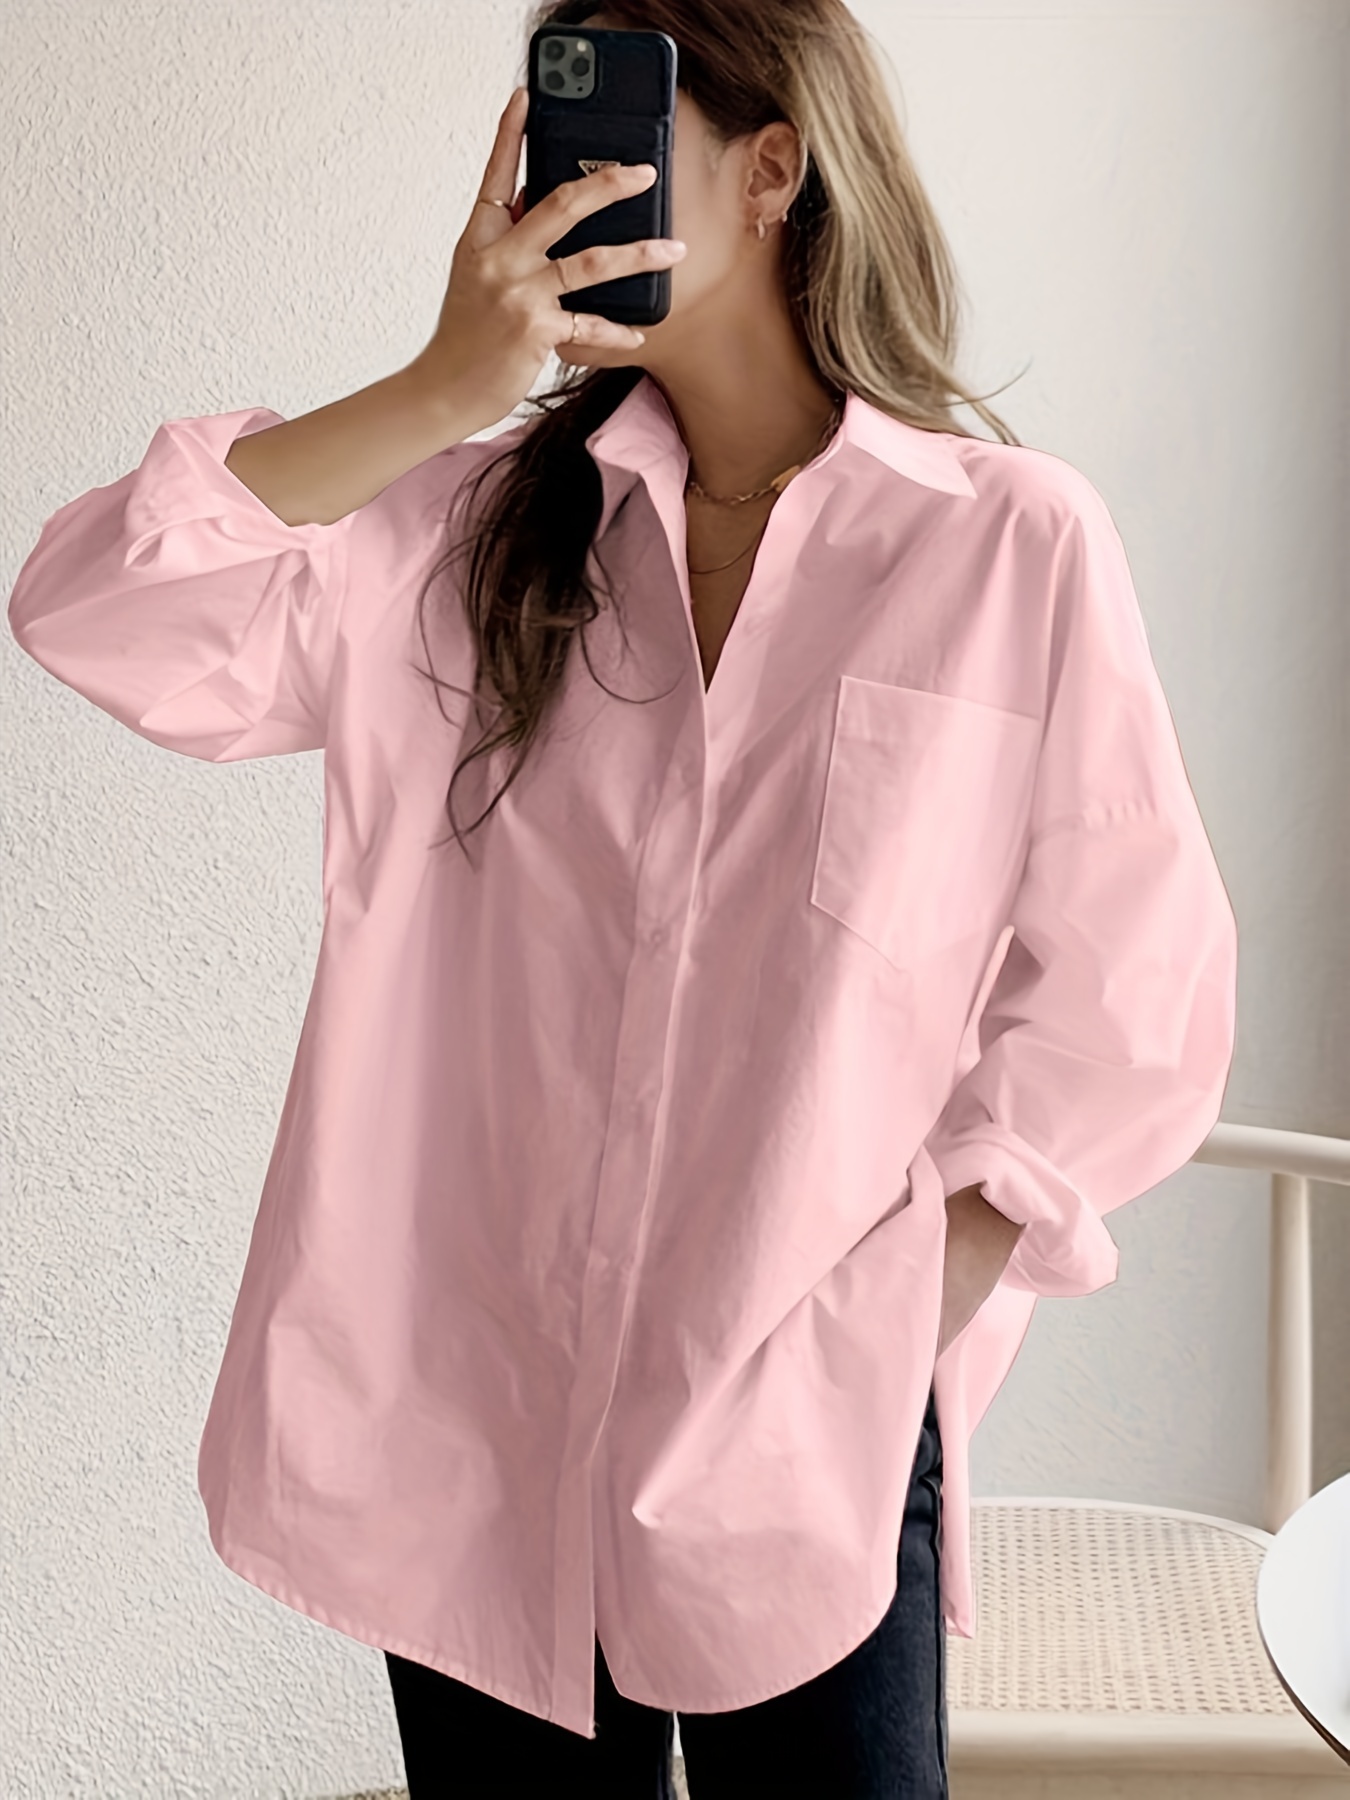 uoDim Womens Button Up V Neck Short Sleeve Shirts Casual Going Out